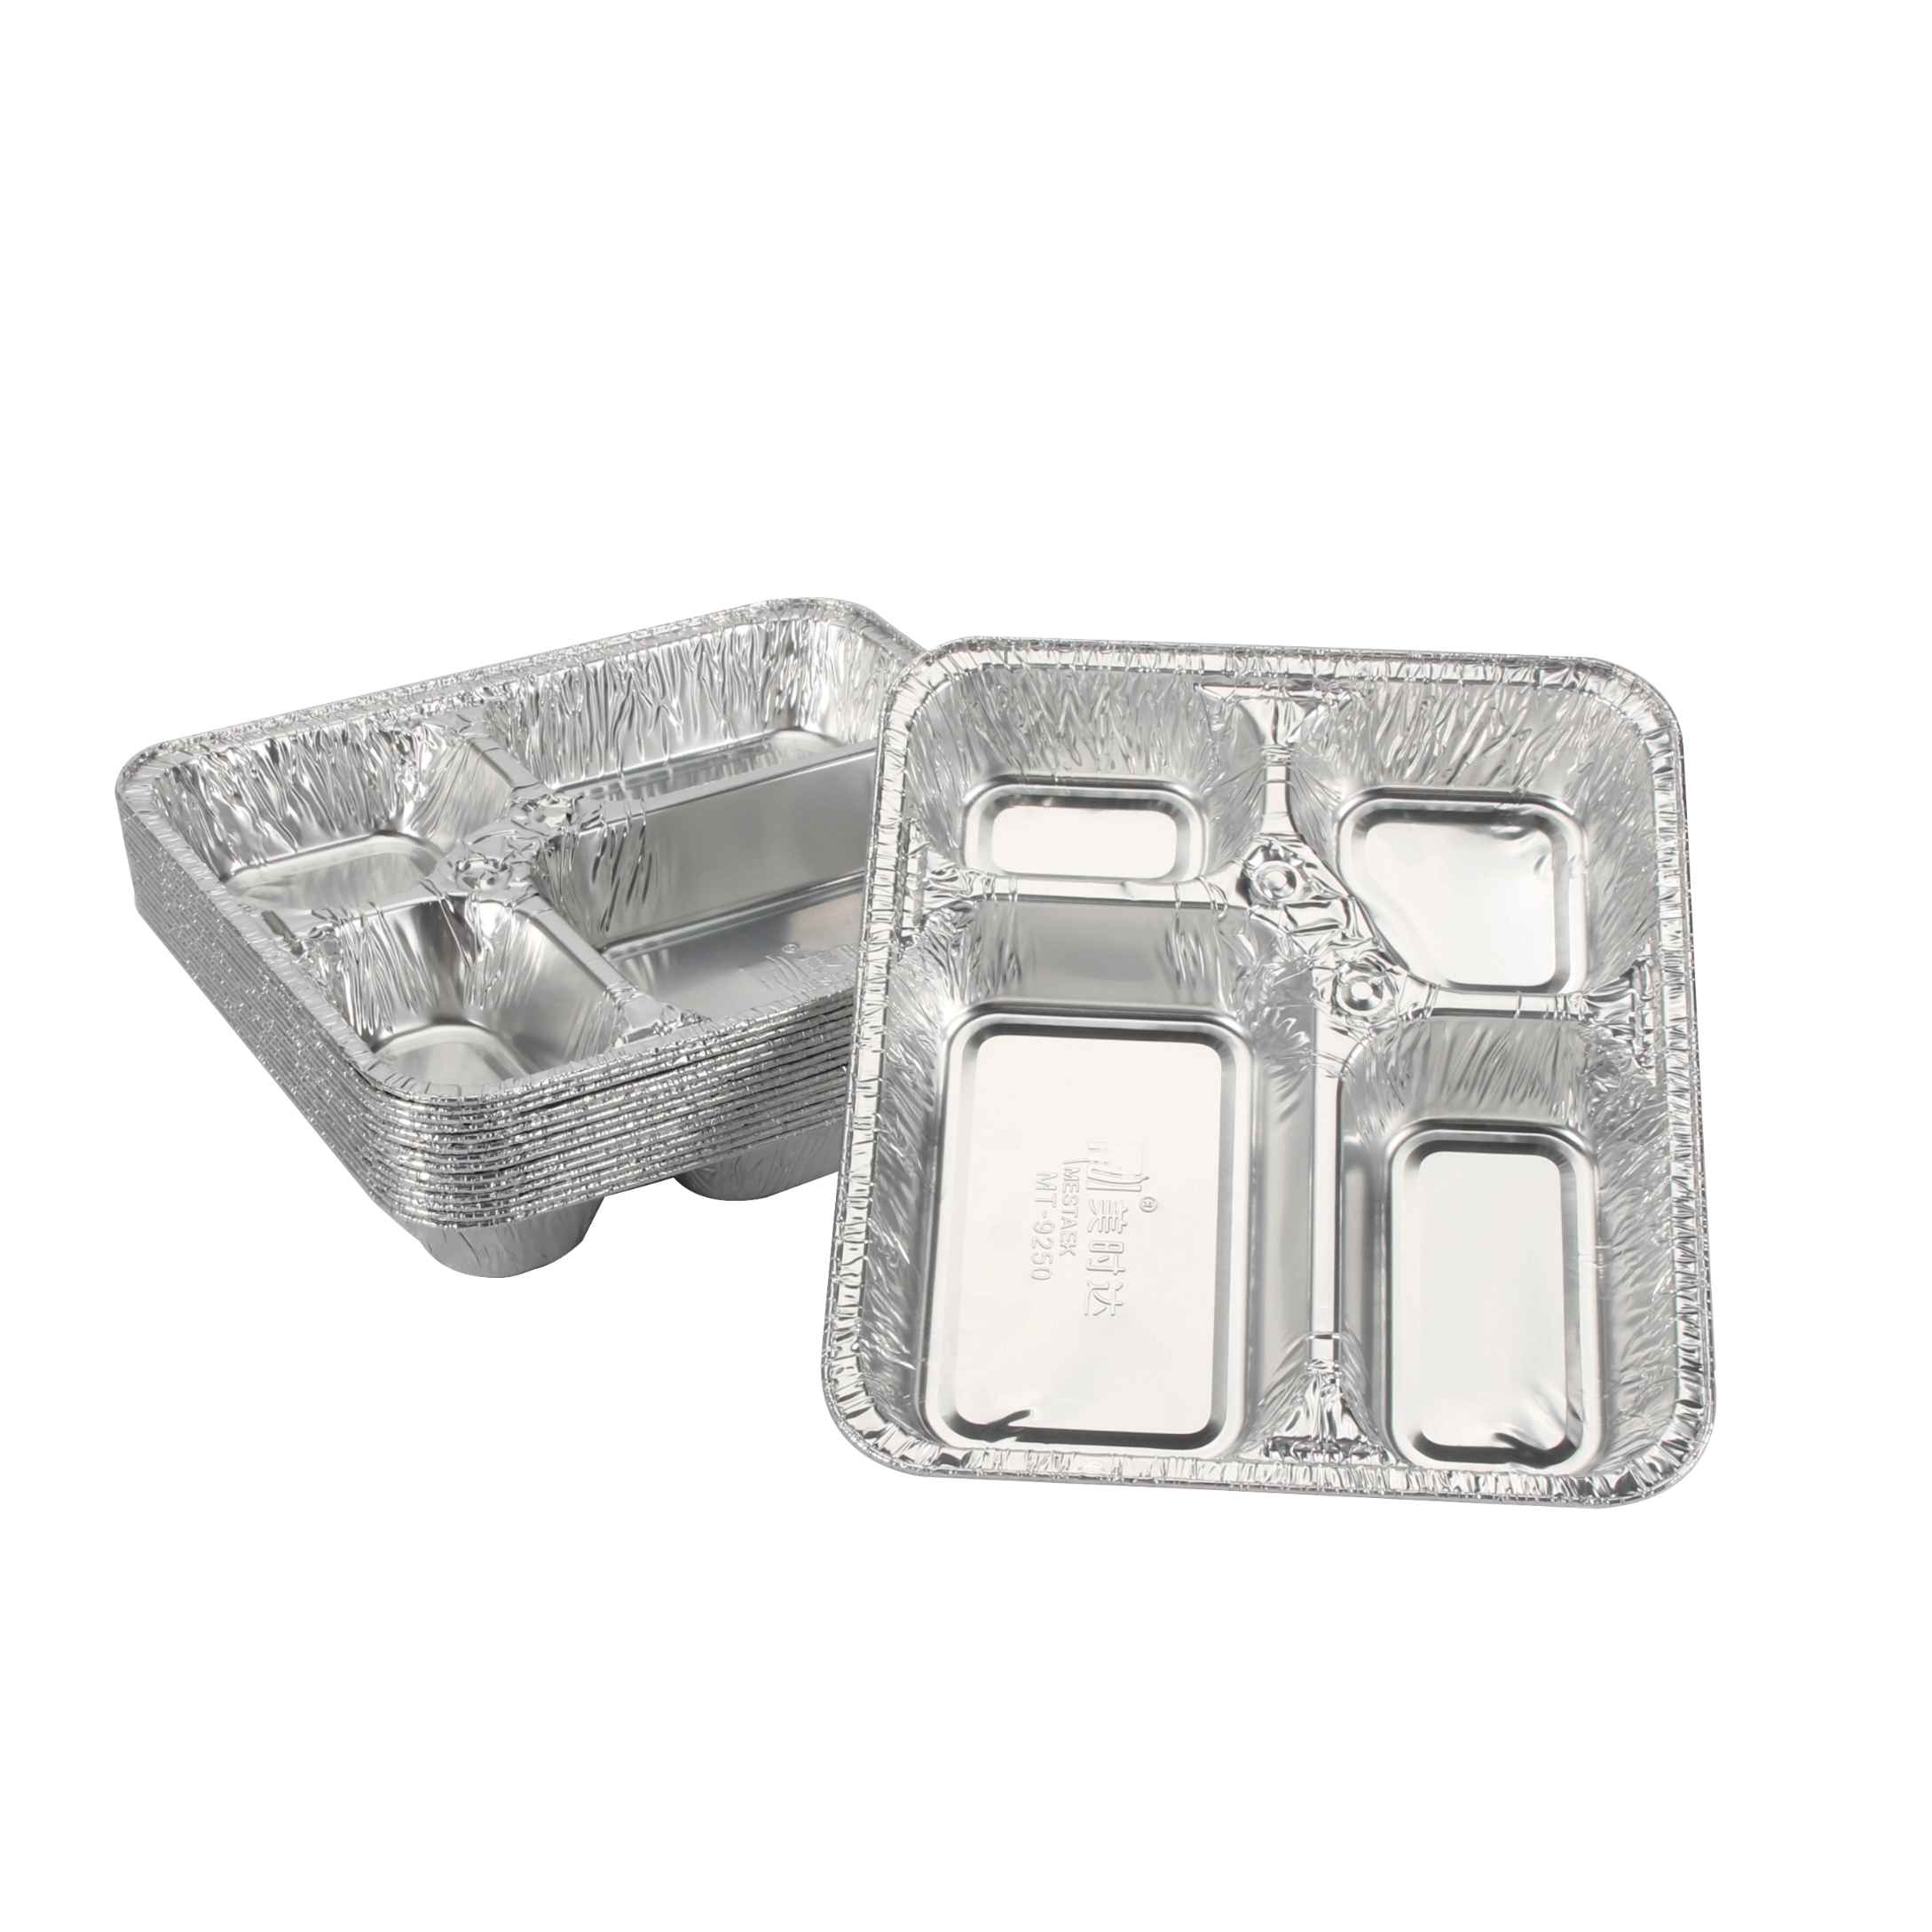 4 compartment foil take-out pan